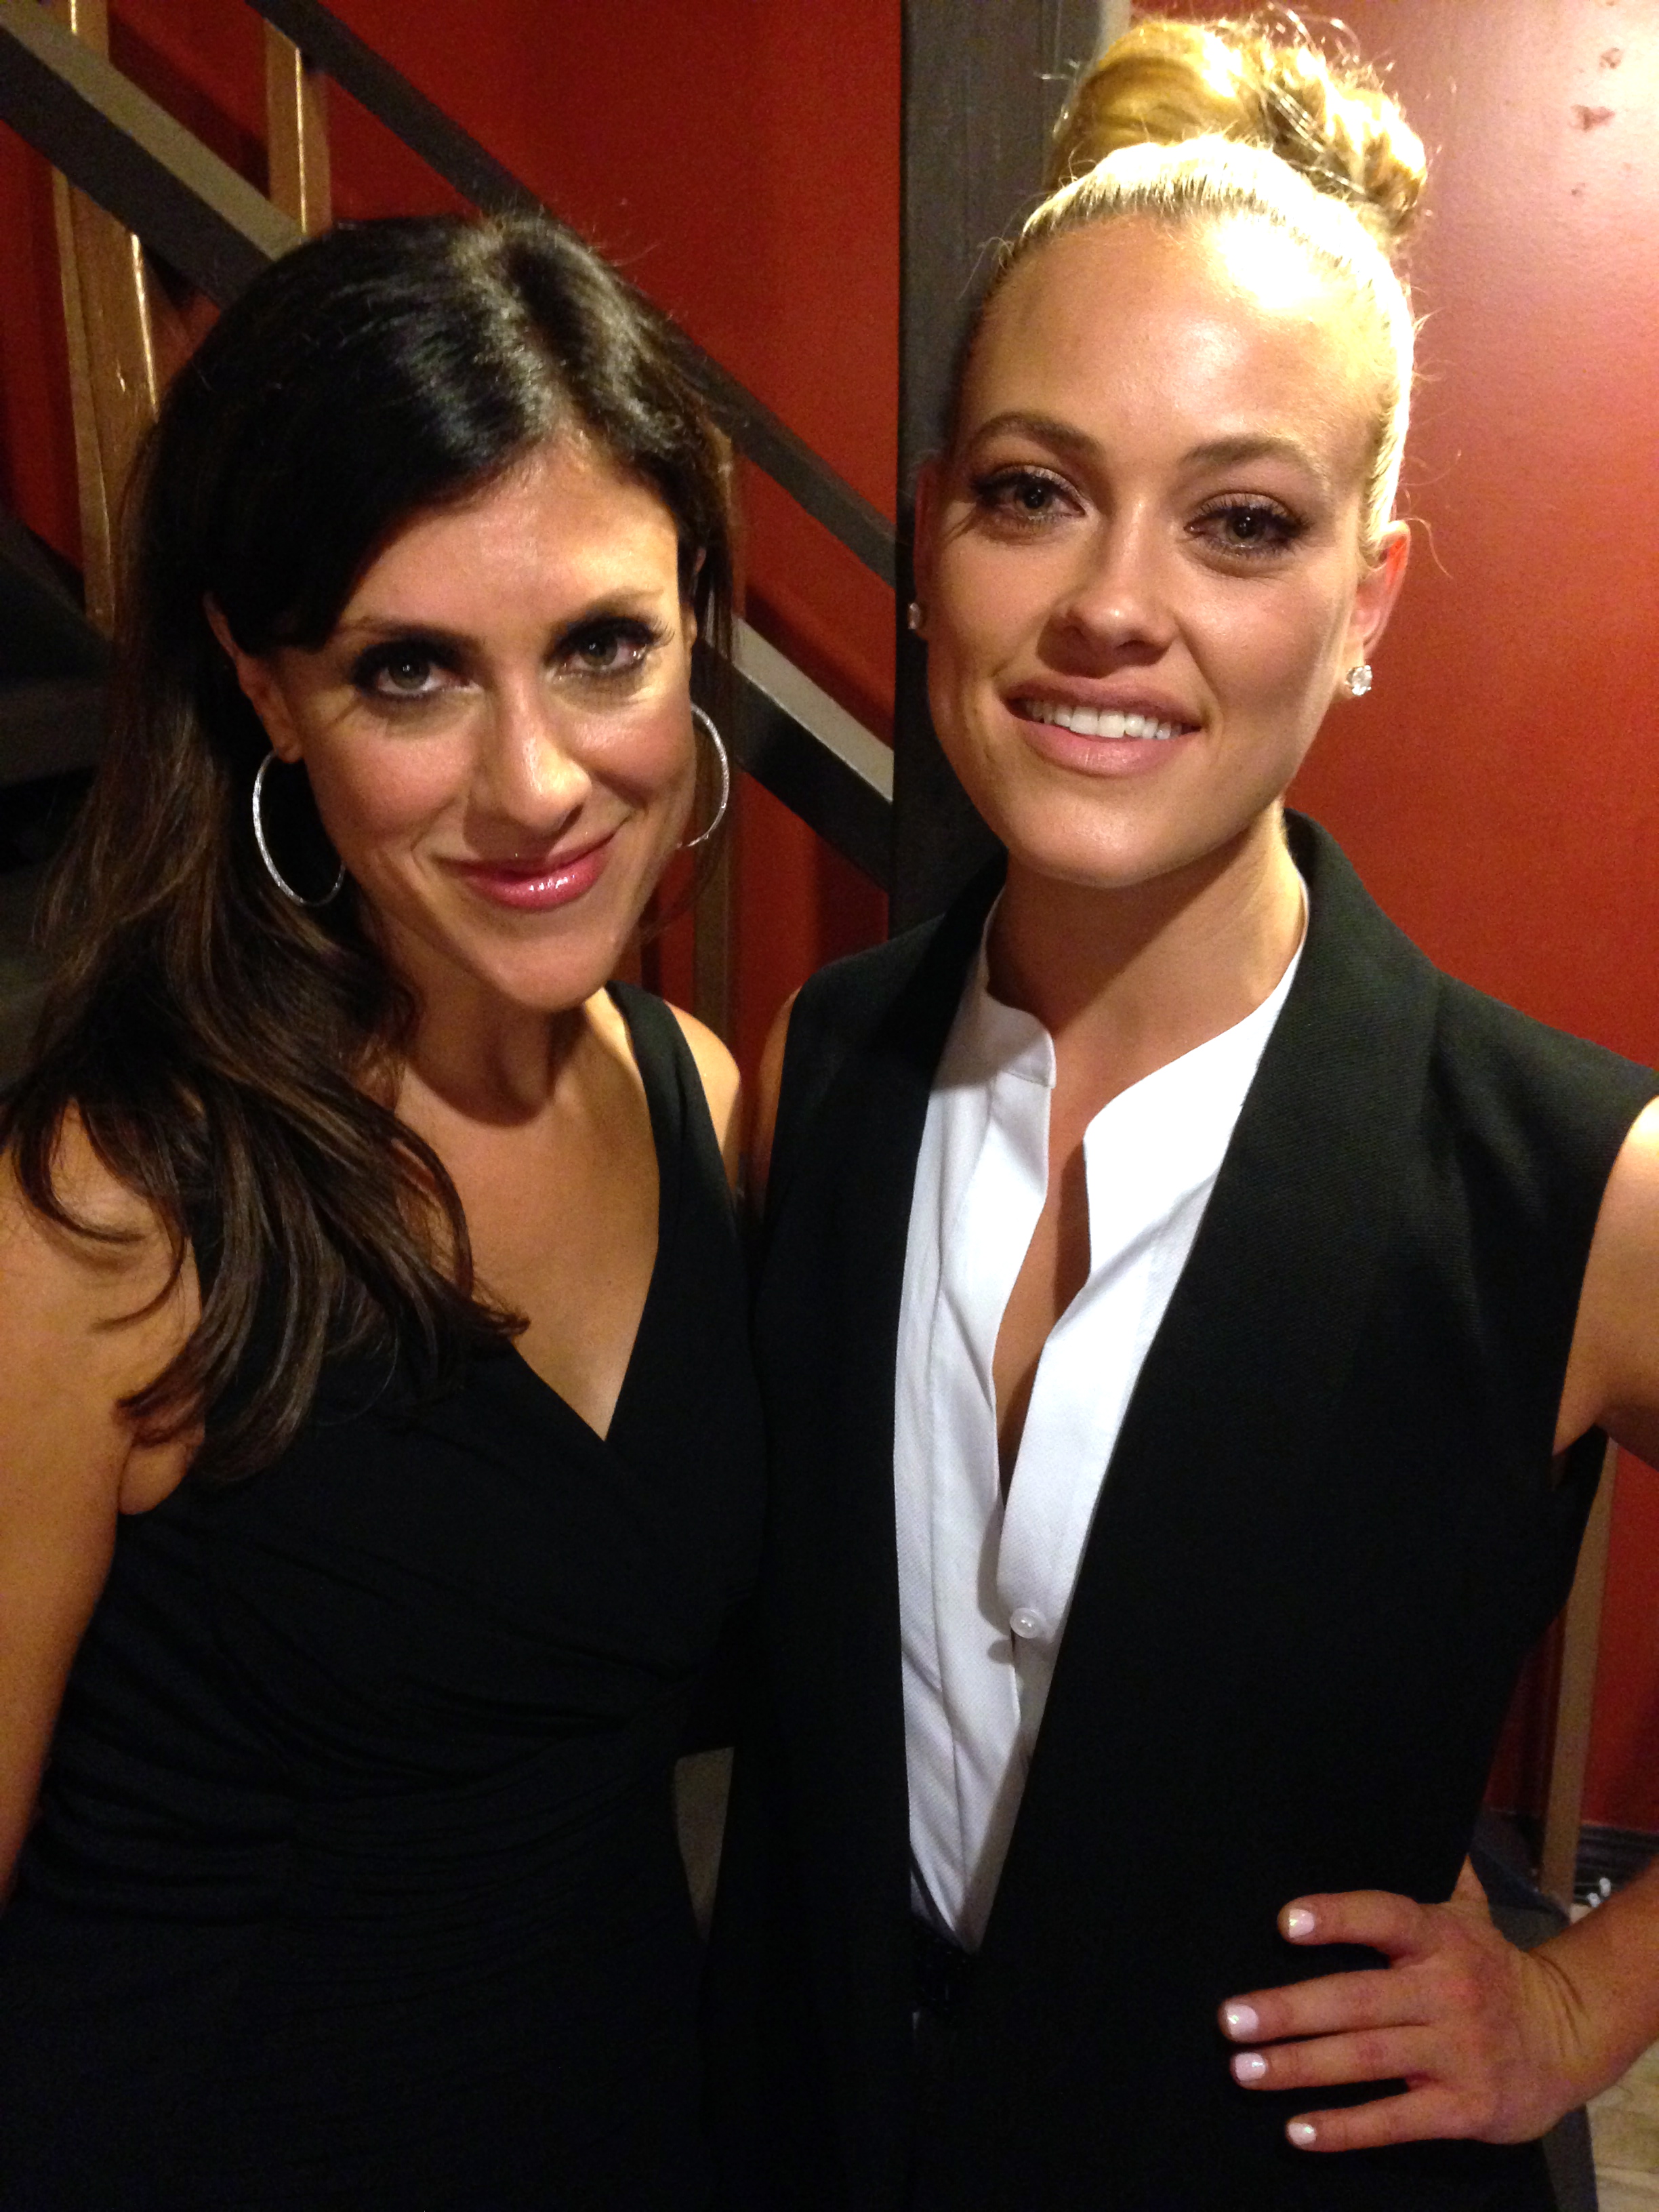 Dance With Me Grand Opening 2014. Angie DeGrazia with Peta Murgatroyd (Dancing with the Stars).